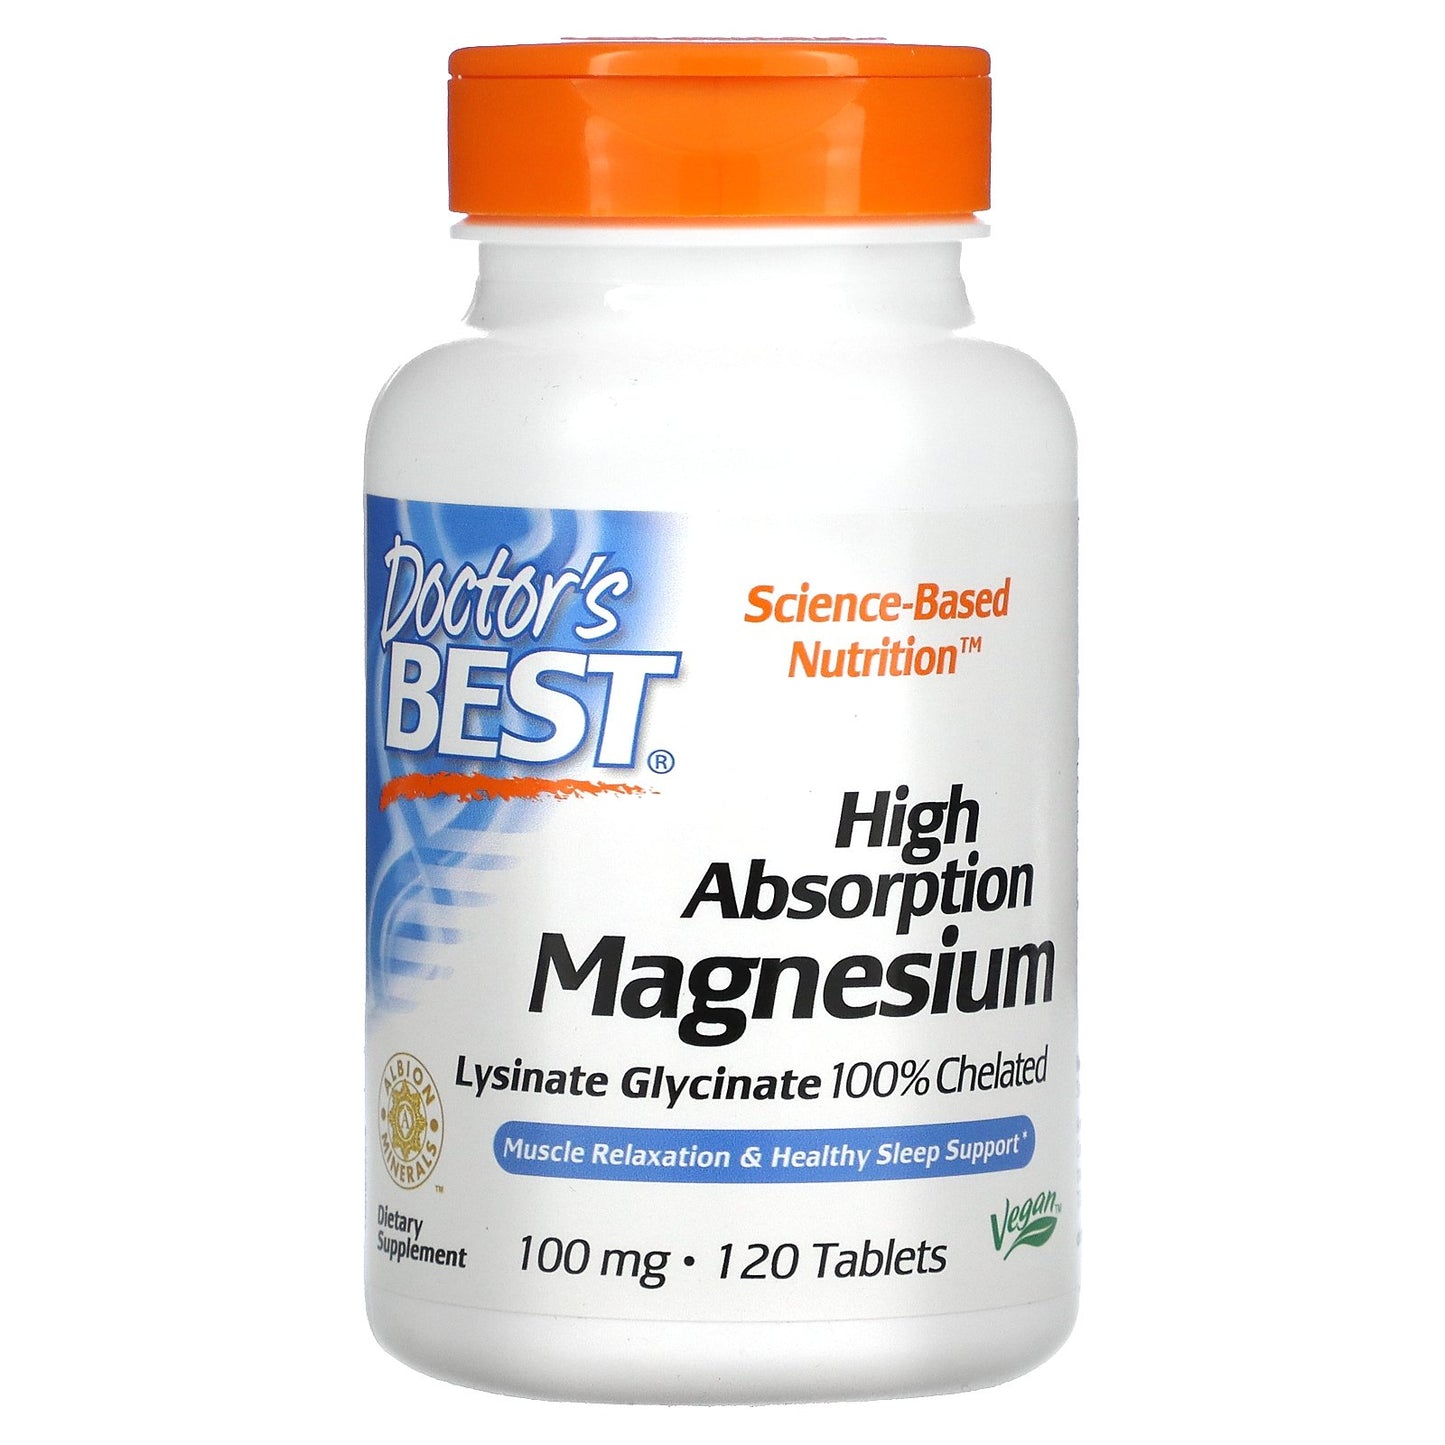 Doctor's Best High Absorption Magnesium, 100 mg, 120 Tablets